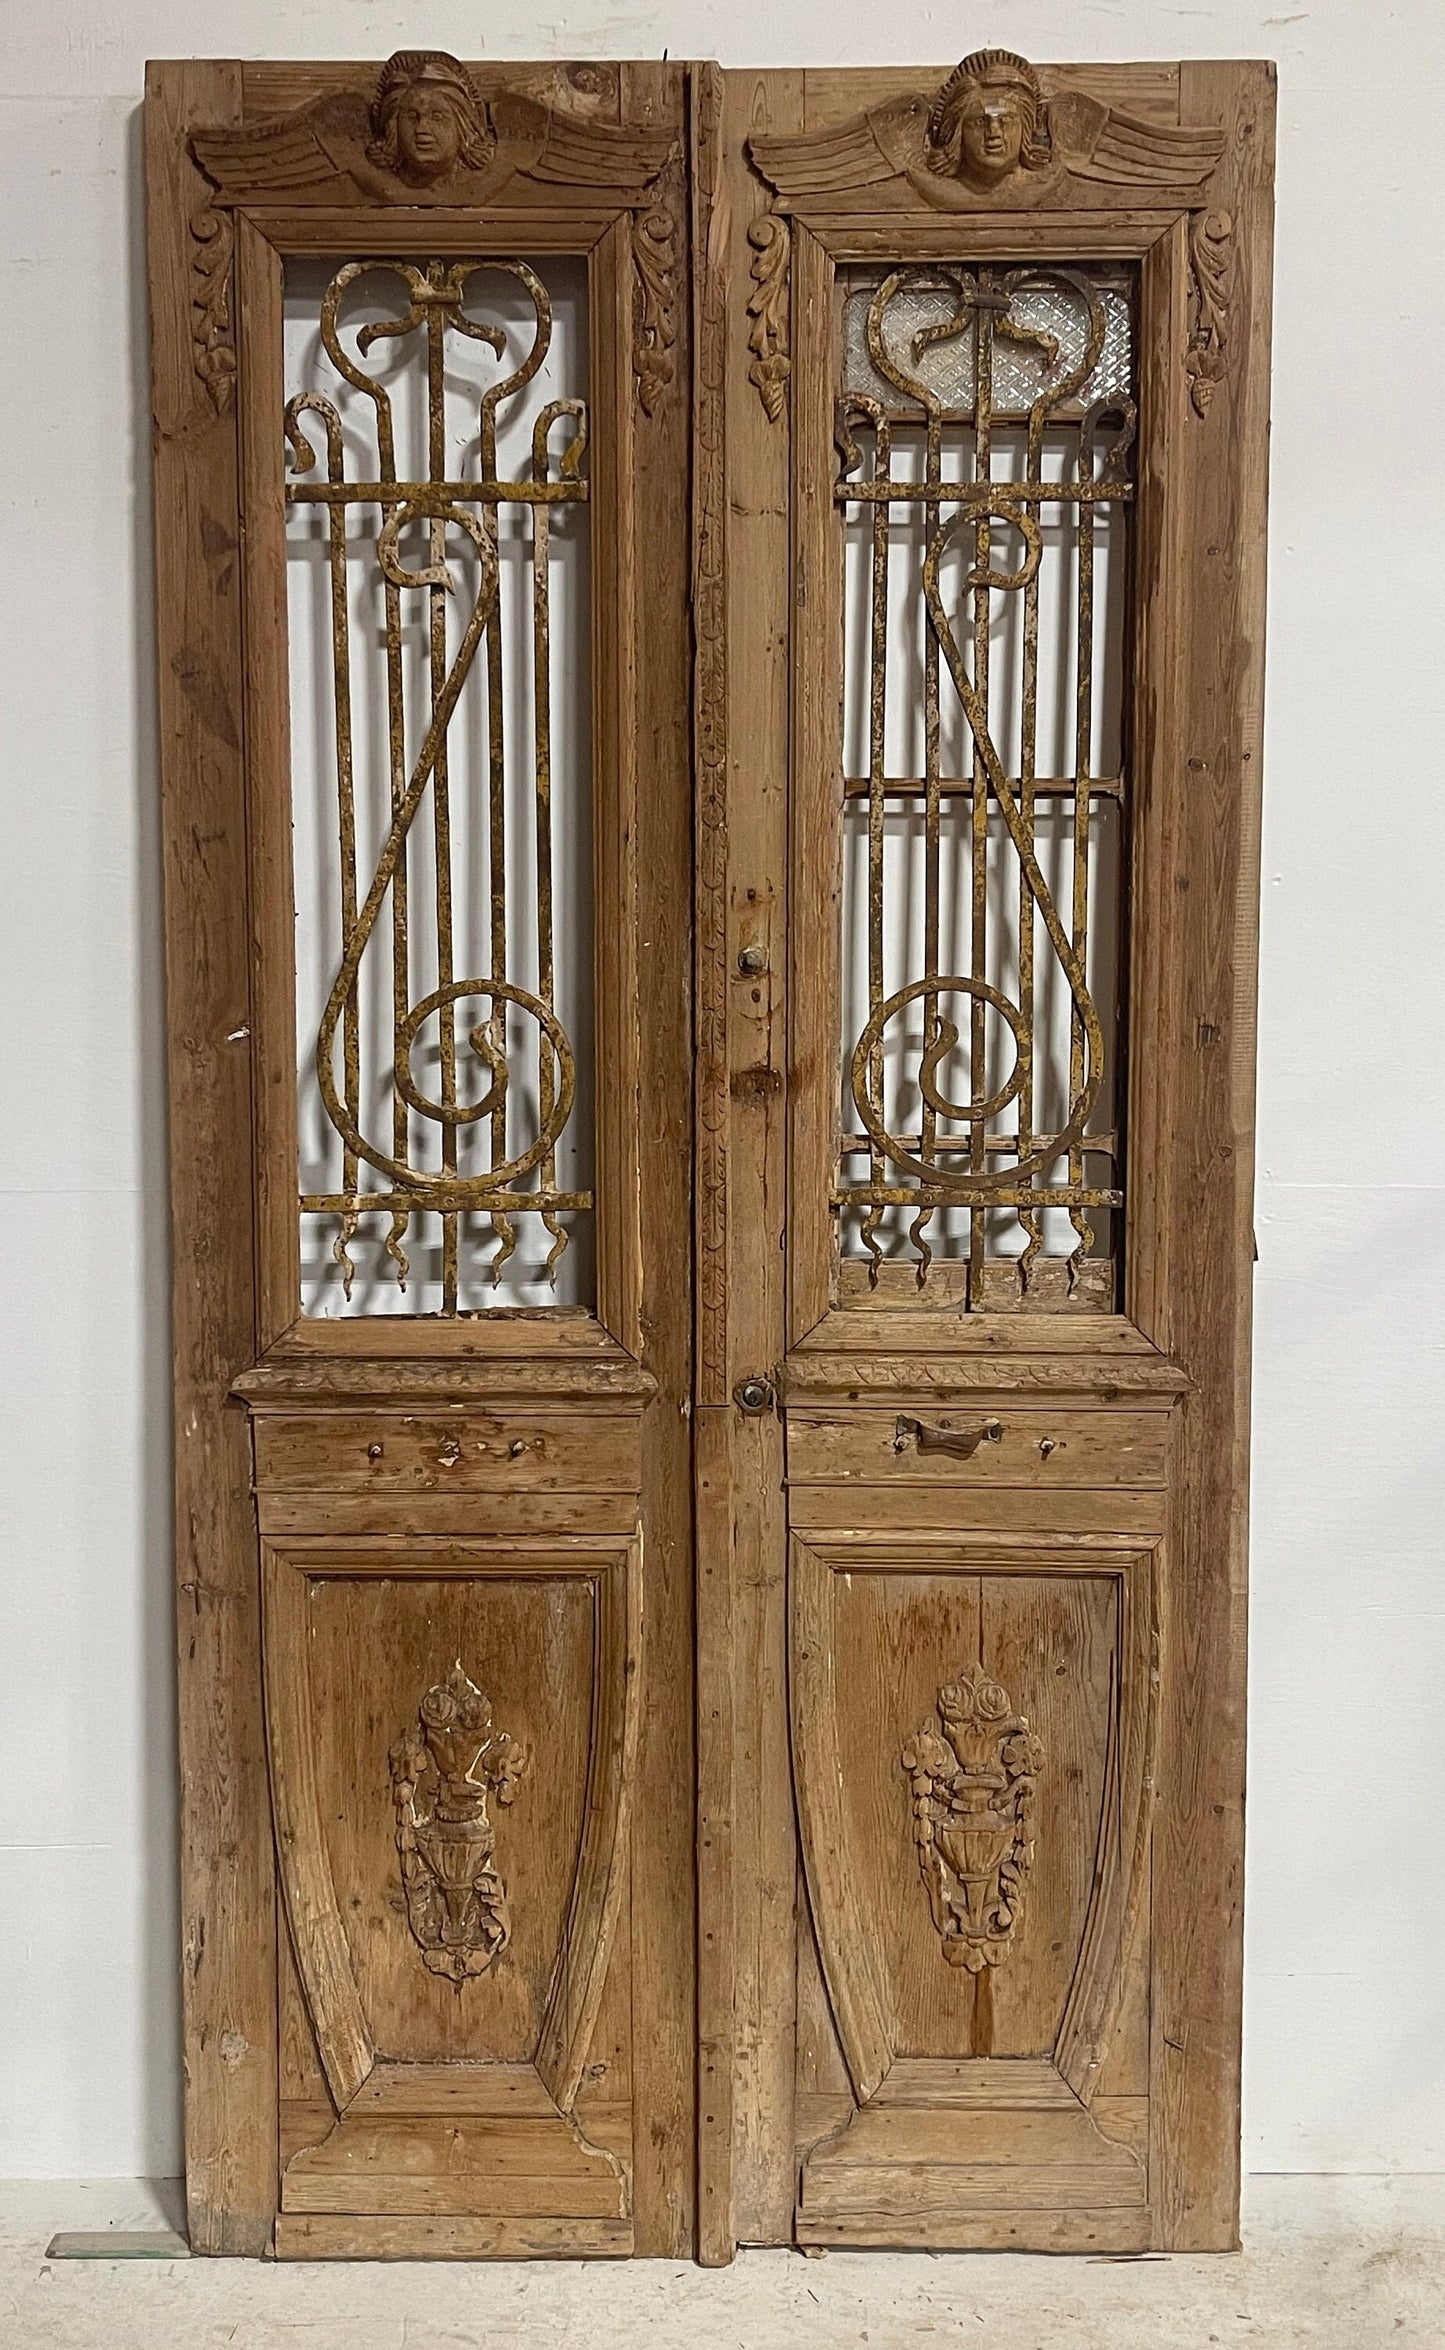 Antique French panel doors with metal (96.5x48.25) H0024As